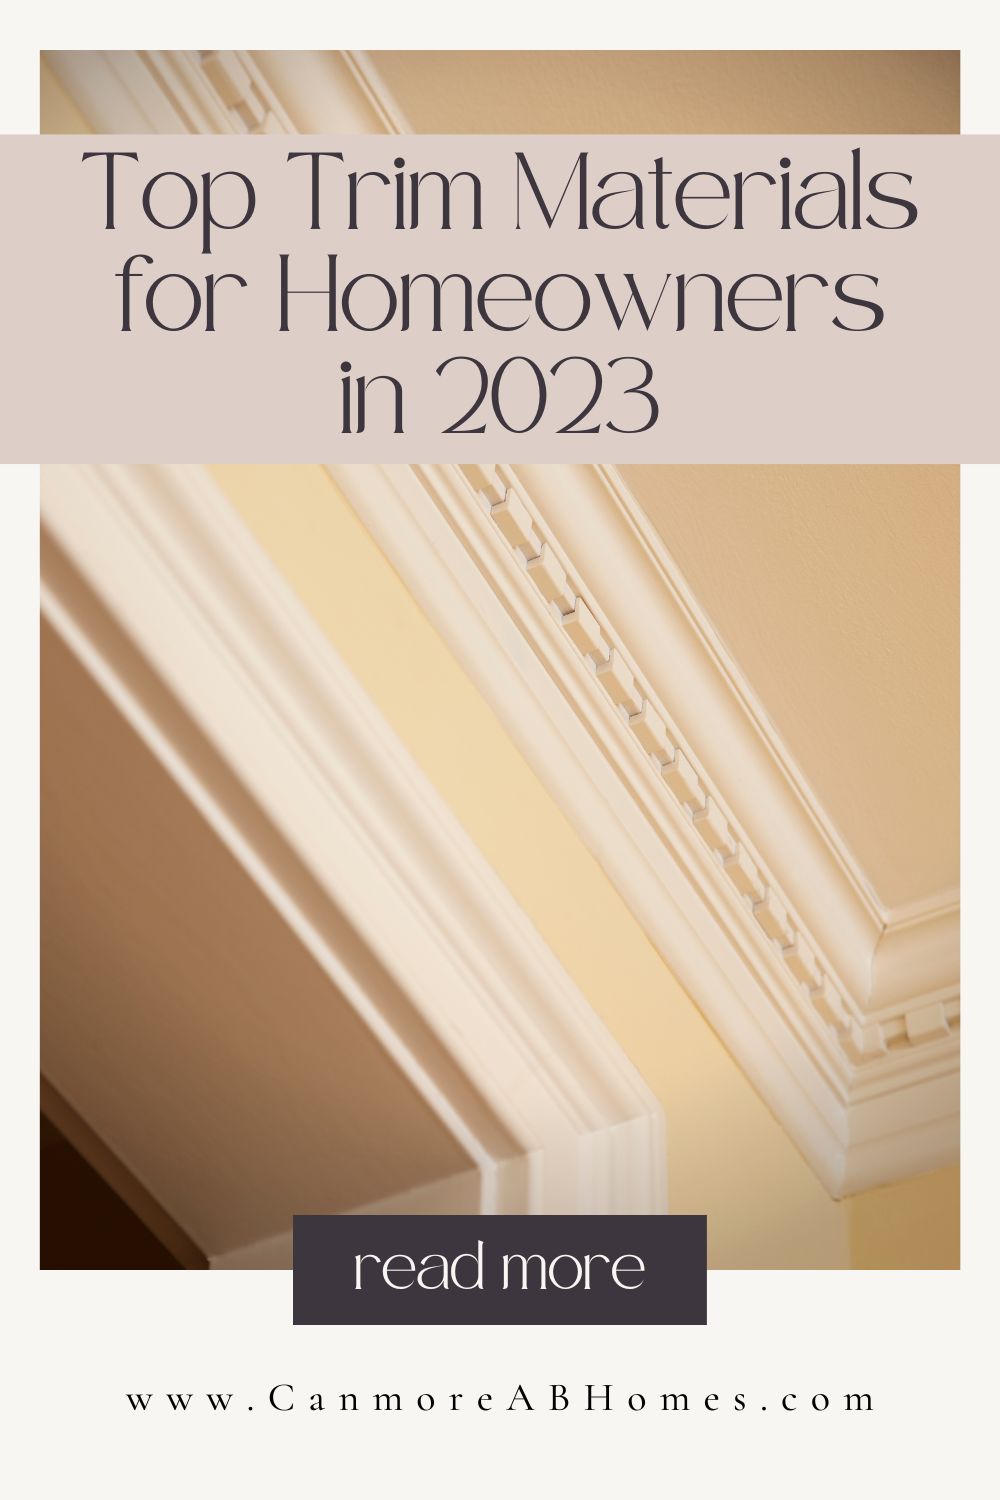 Top Trim Materials for Homeowners in 2023